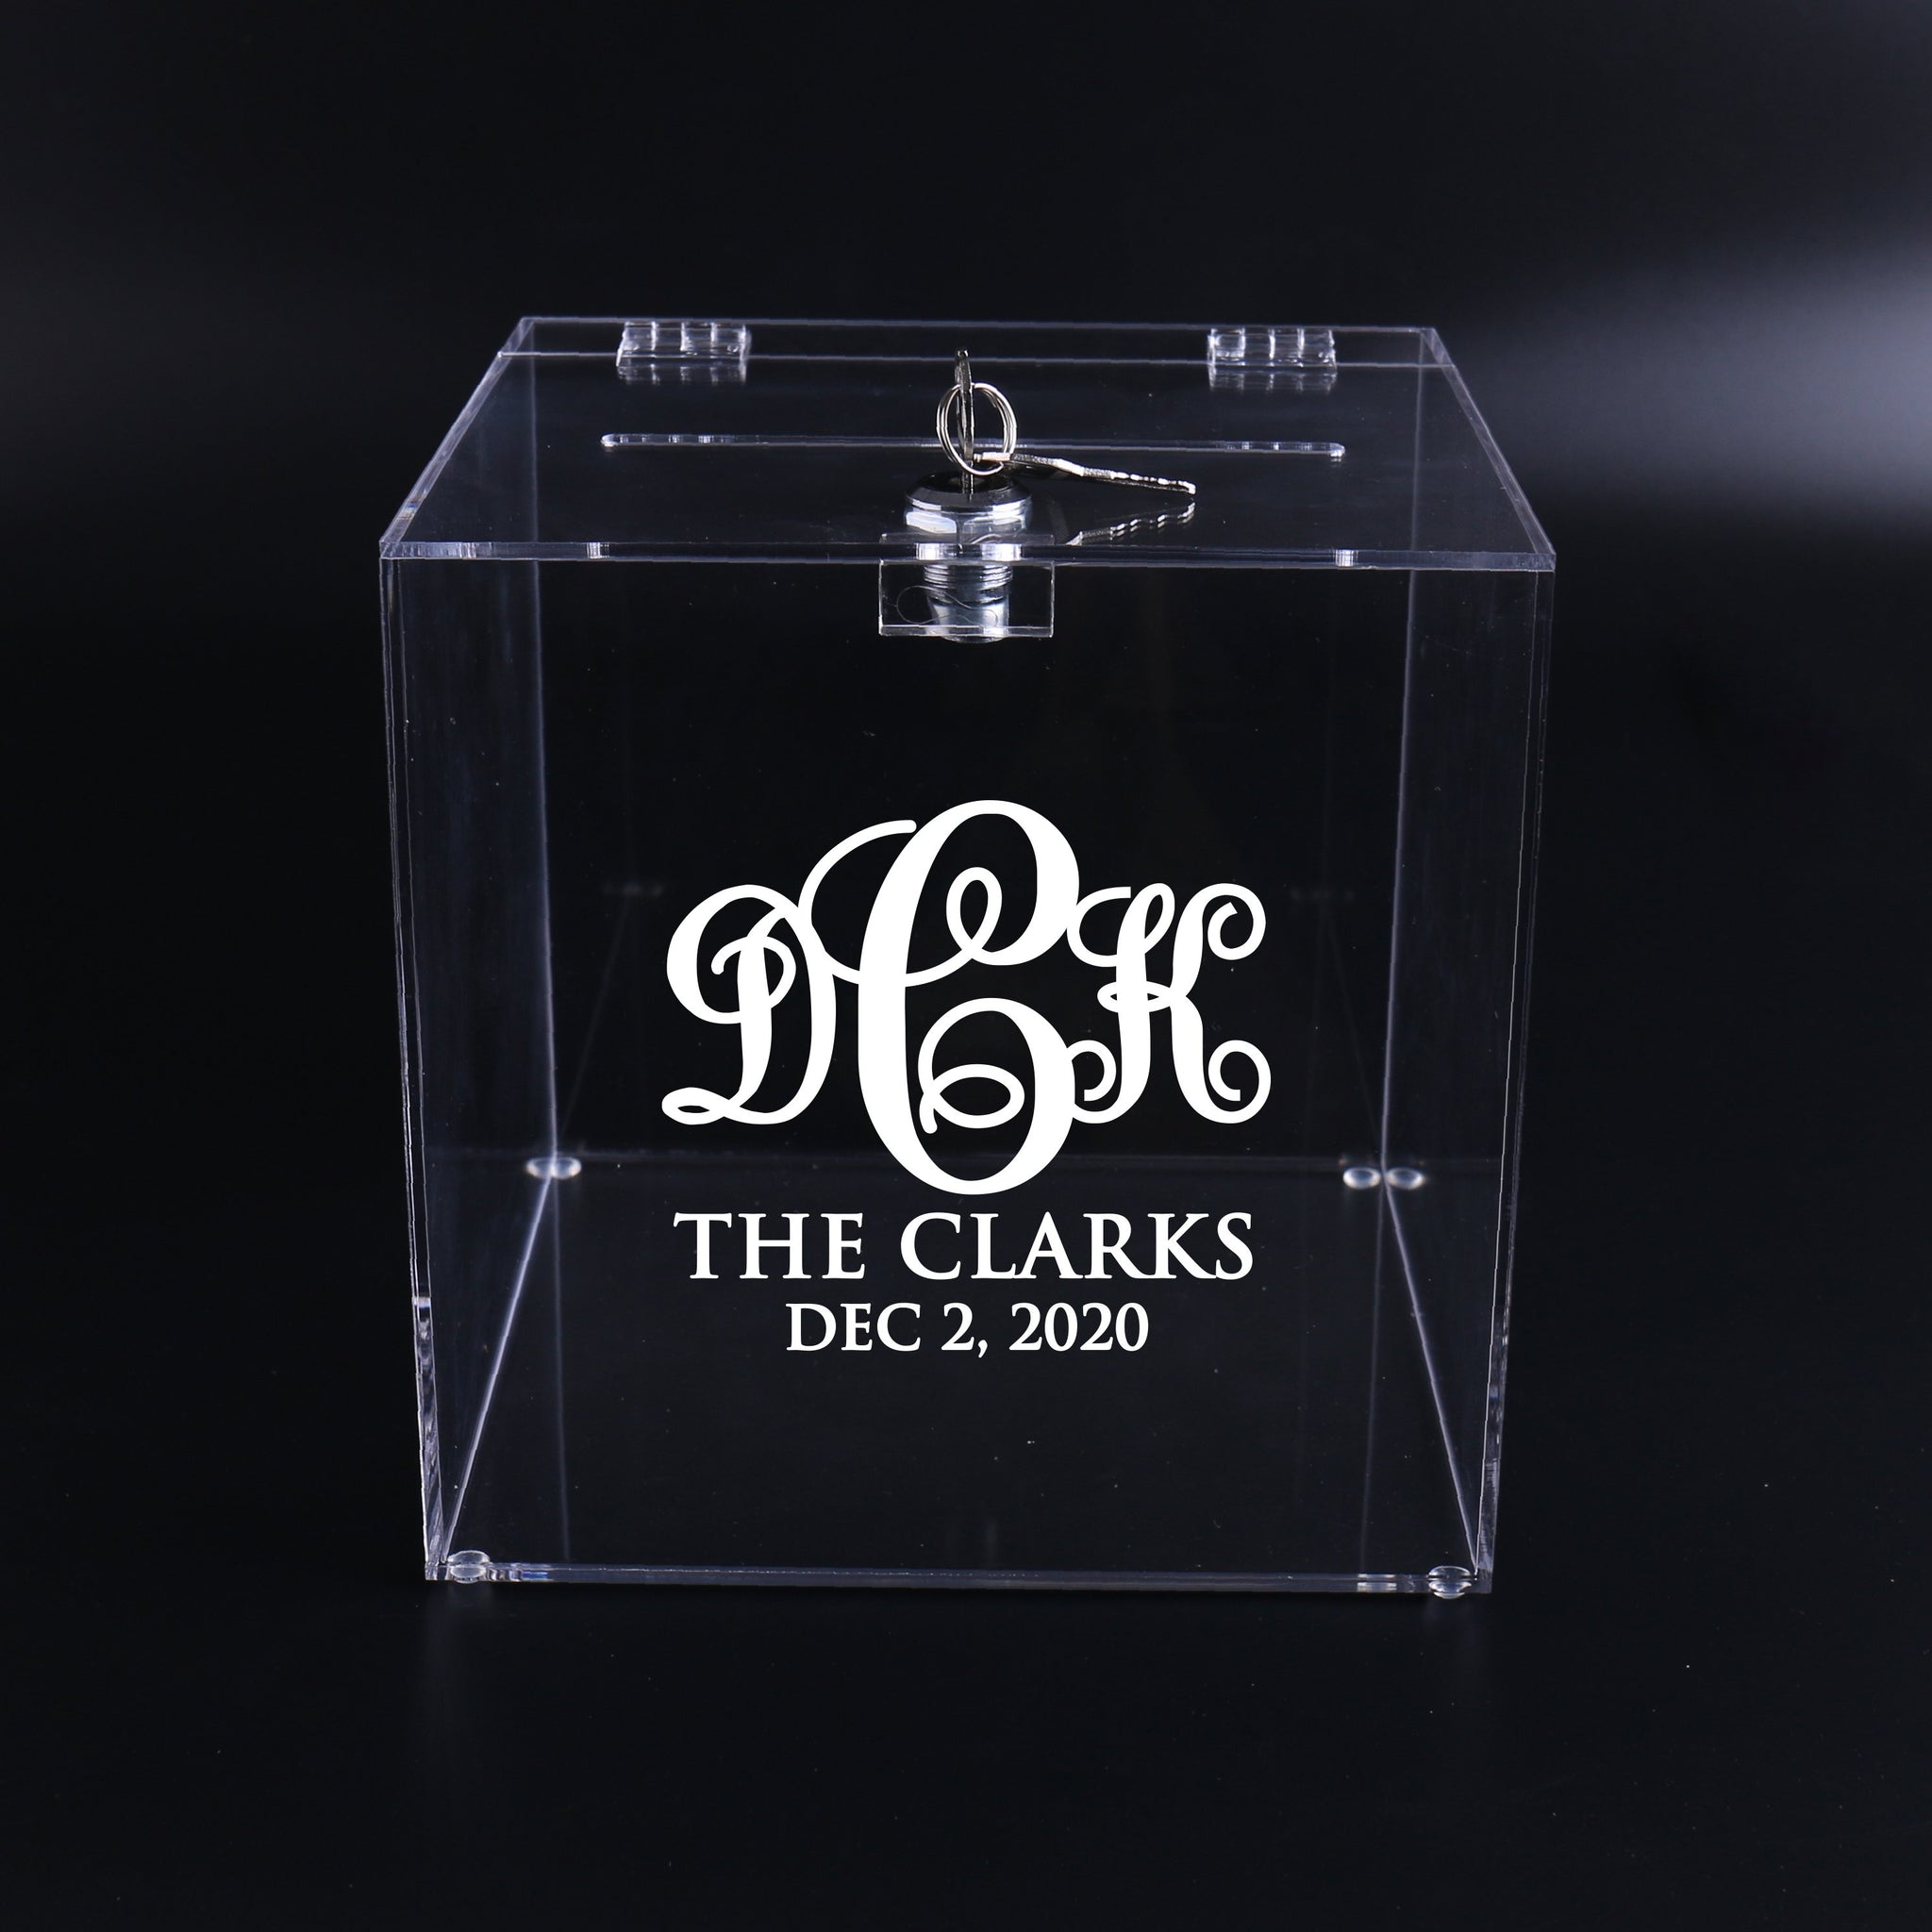 Personalized Acrylic Card Box, Clear Box with Lock Sign, Wedding